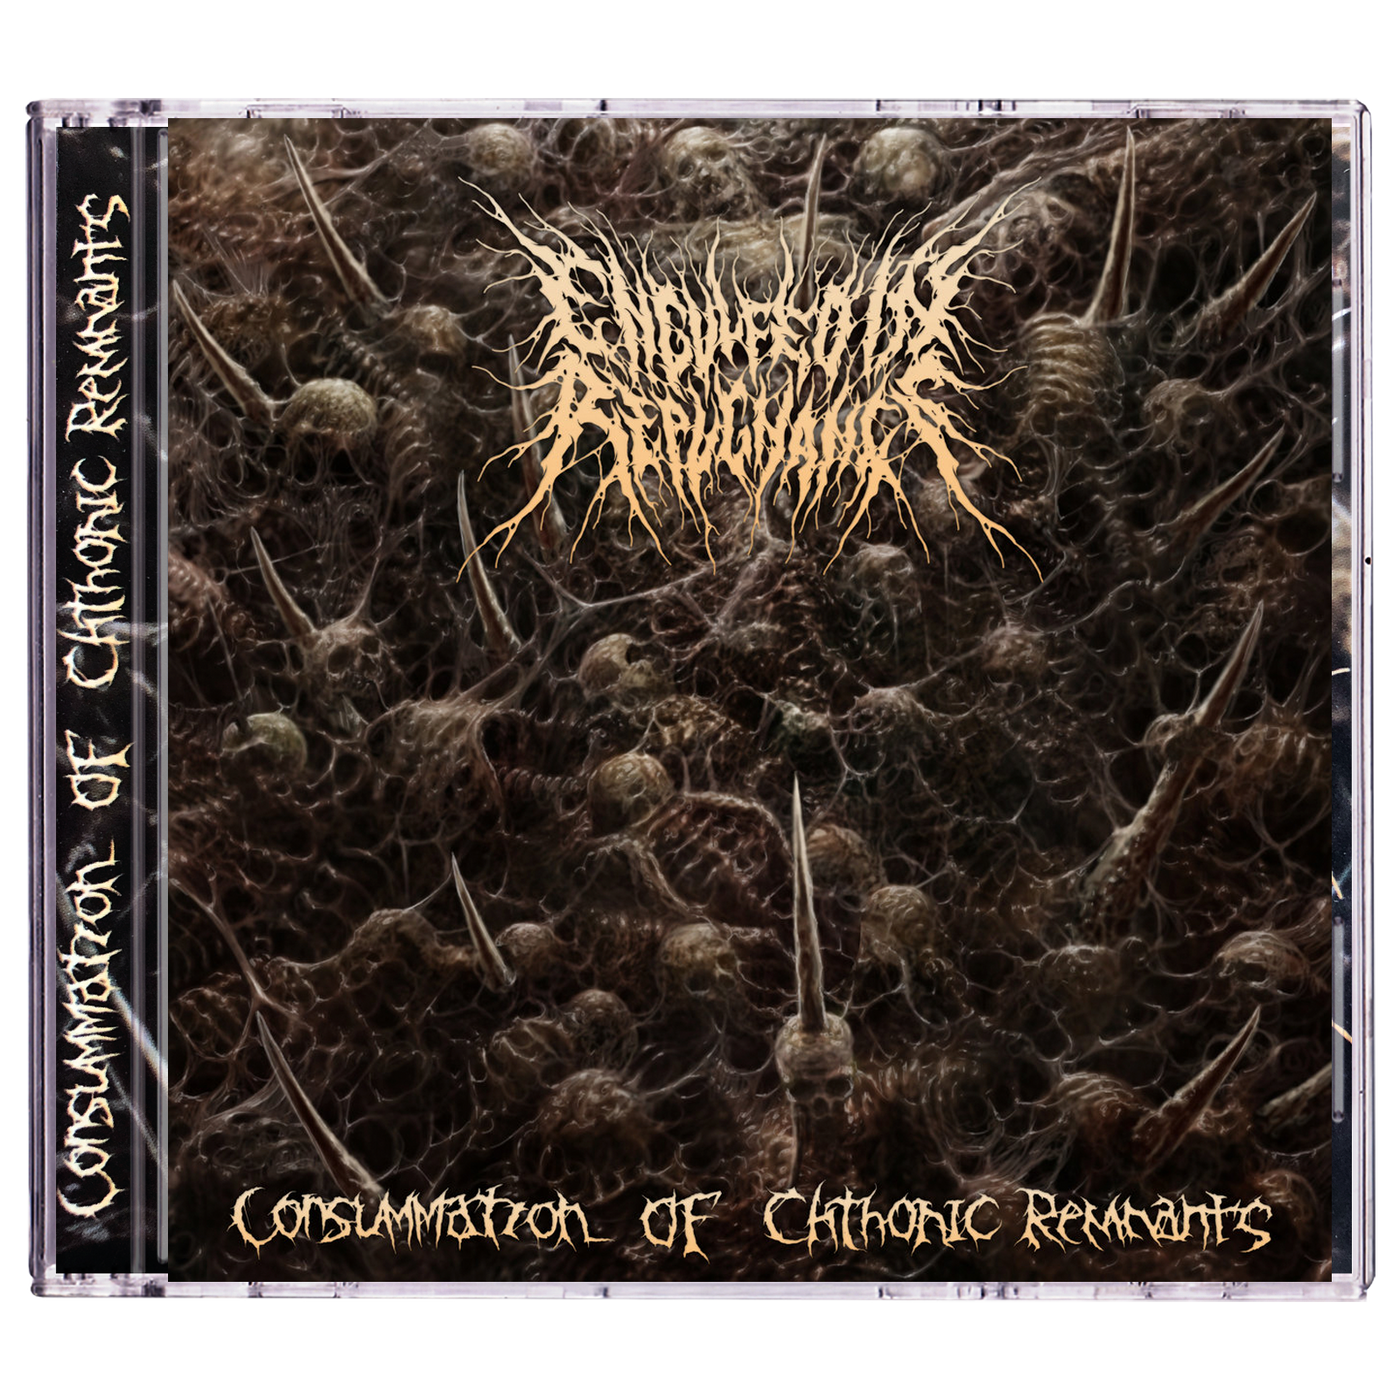 Engulfed in Repugnance 'Consummation Of Chthonic Remnants' CD